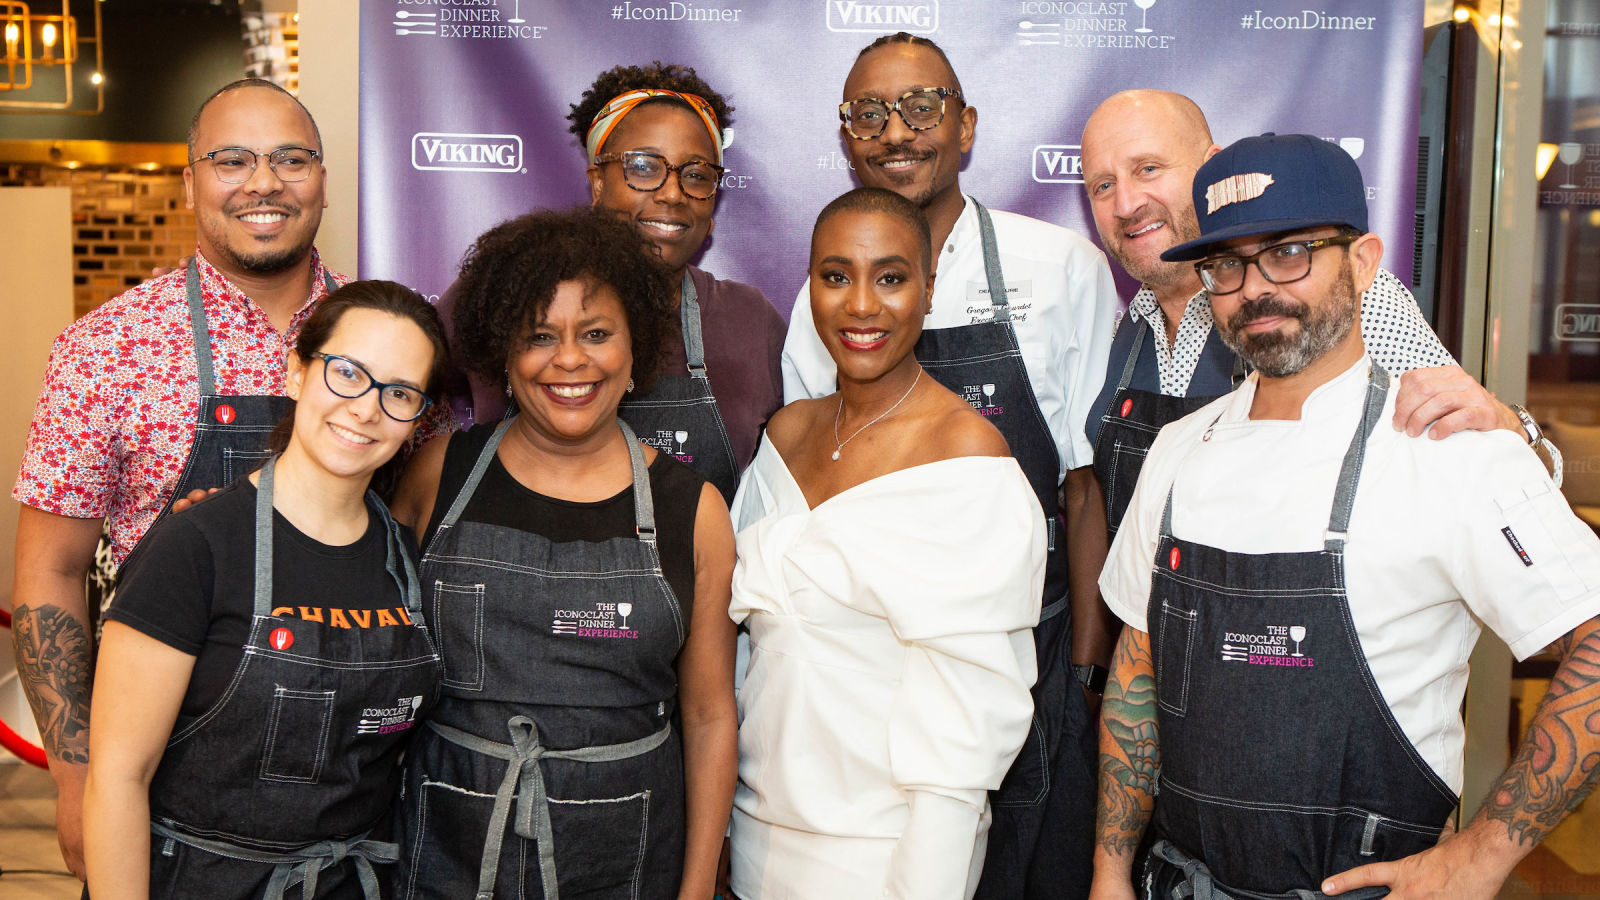 A Taste of Success: The Iconoclast Dinner Experience and James Beard Foundation Are Giving Chefs of Color a Seat at the Table